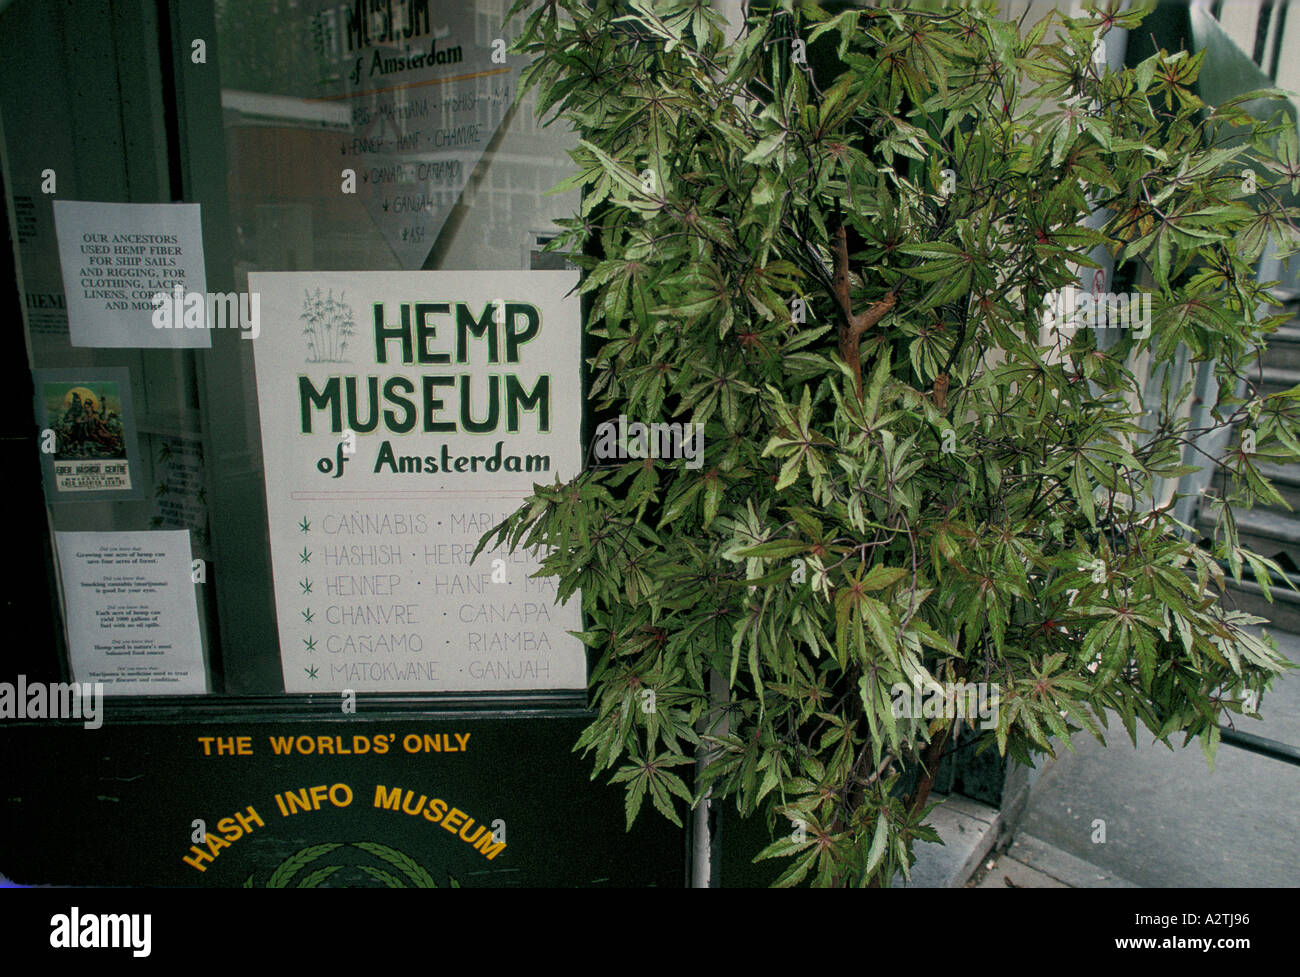 the worlds only hash info museum hemp museum amsterdam holland 1993 Stock Photo